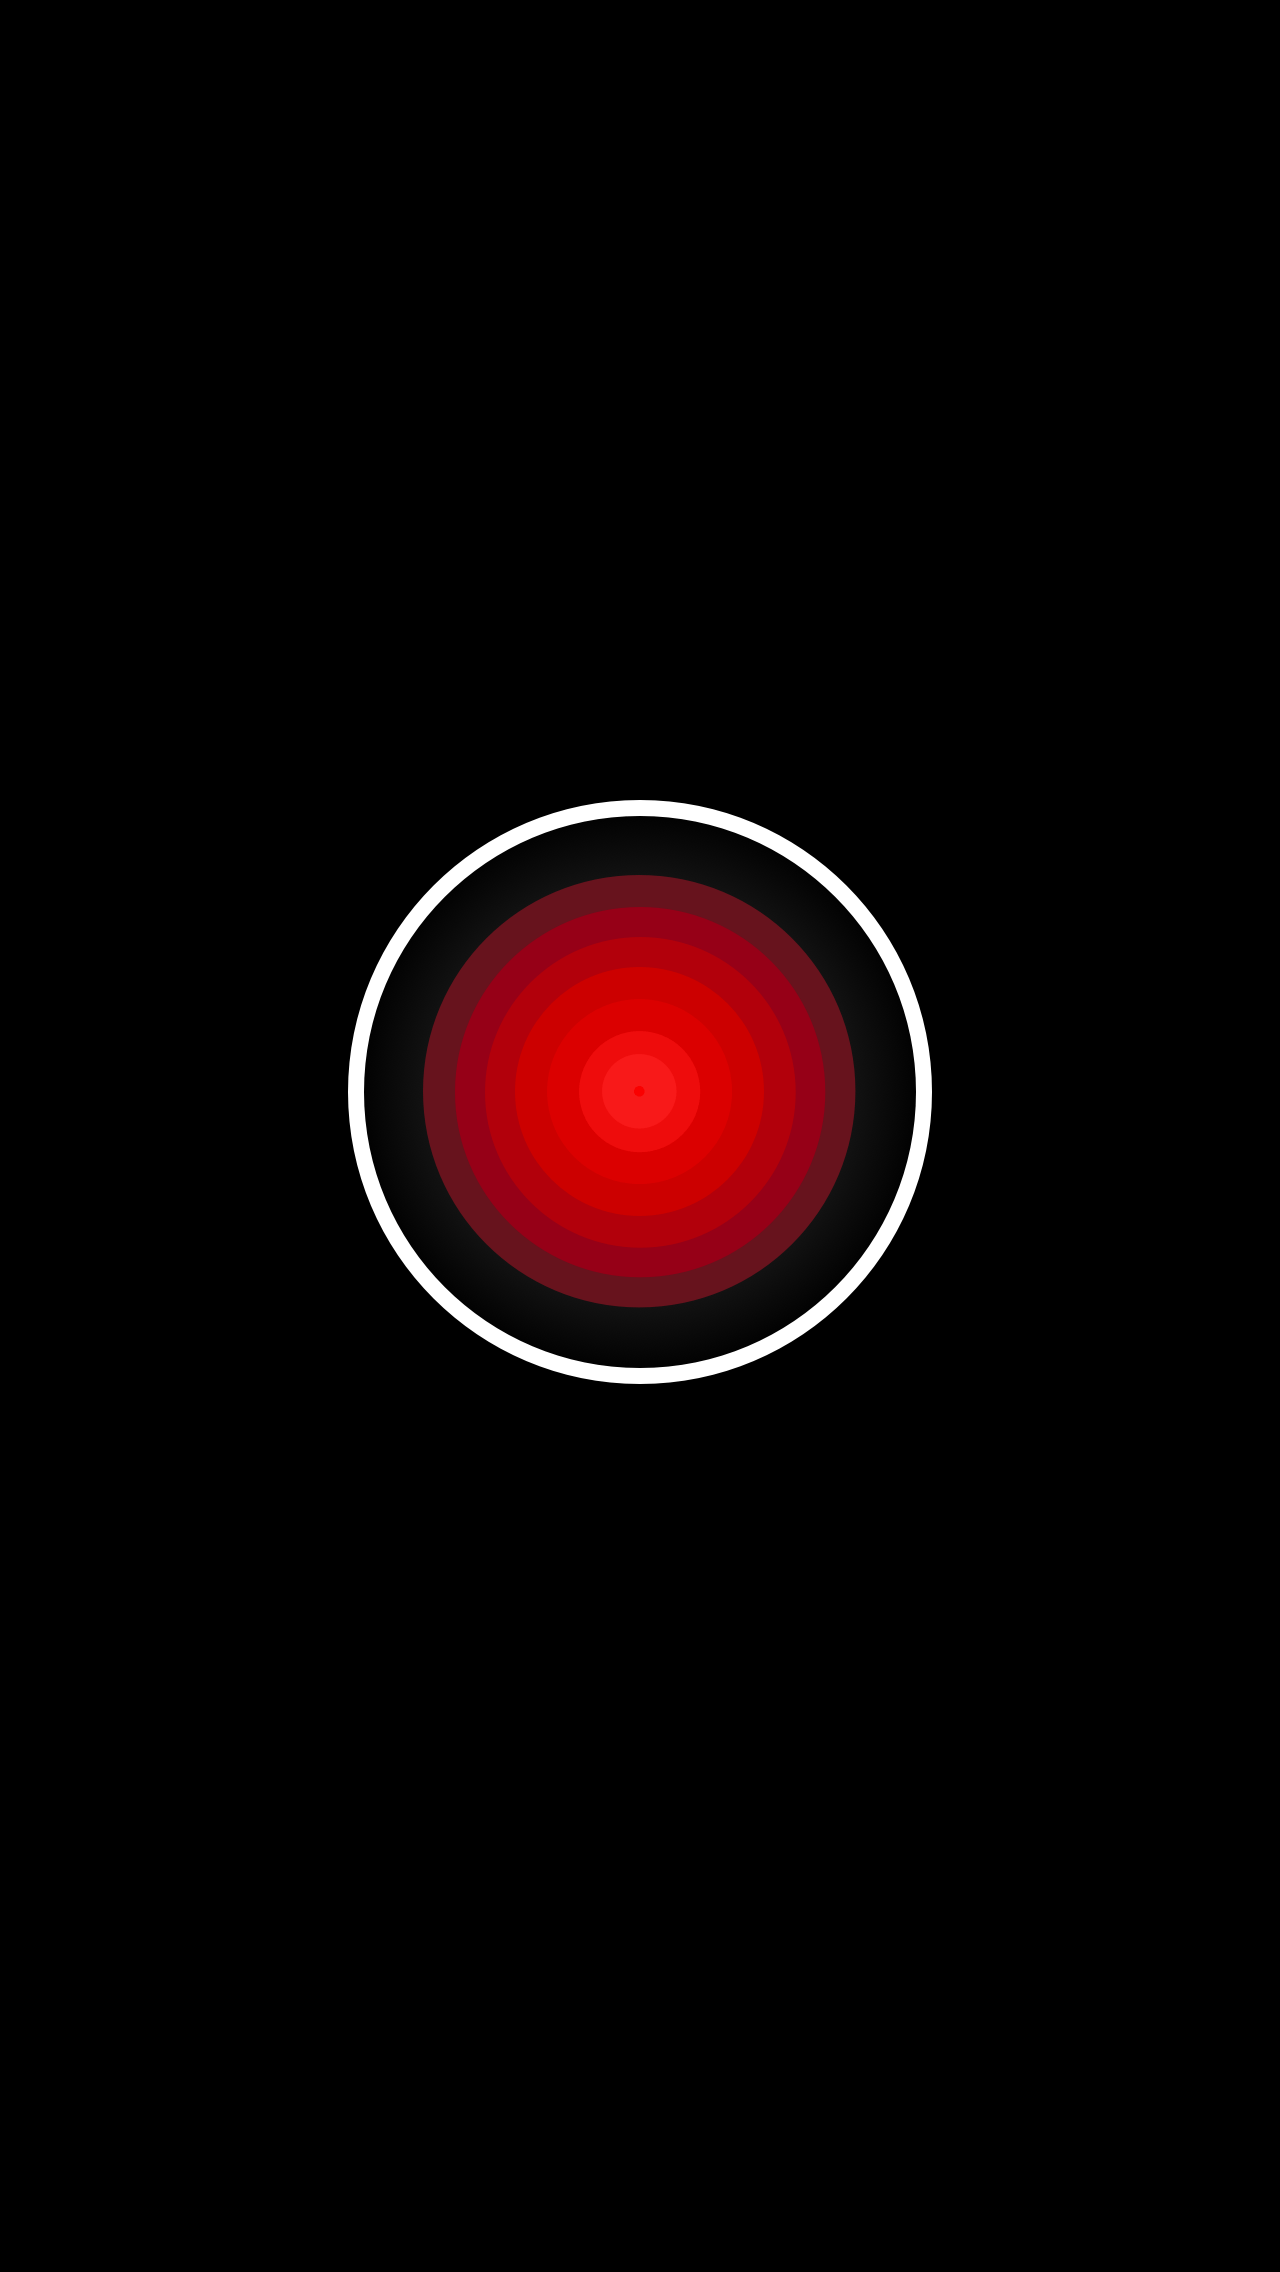 2001 A Space Odyssey Wallpaper